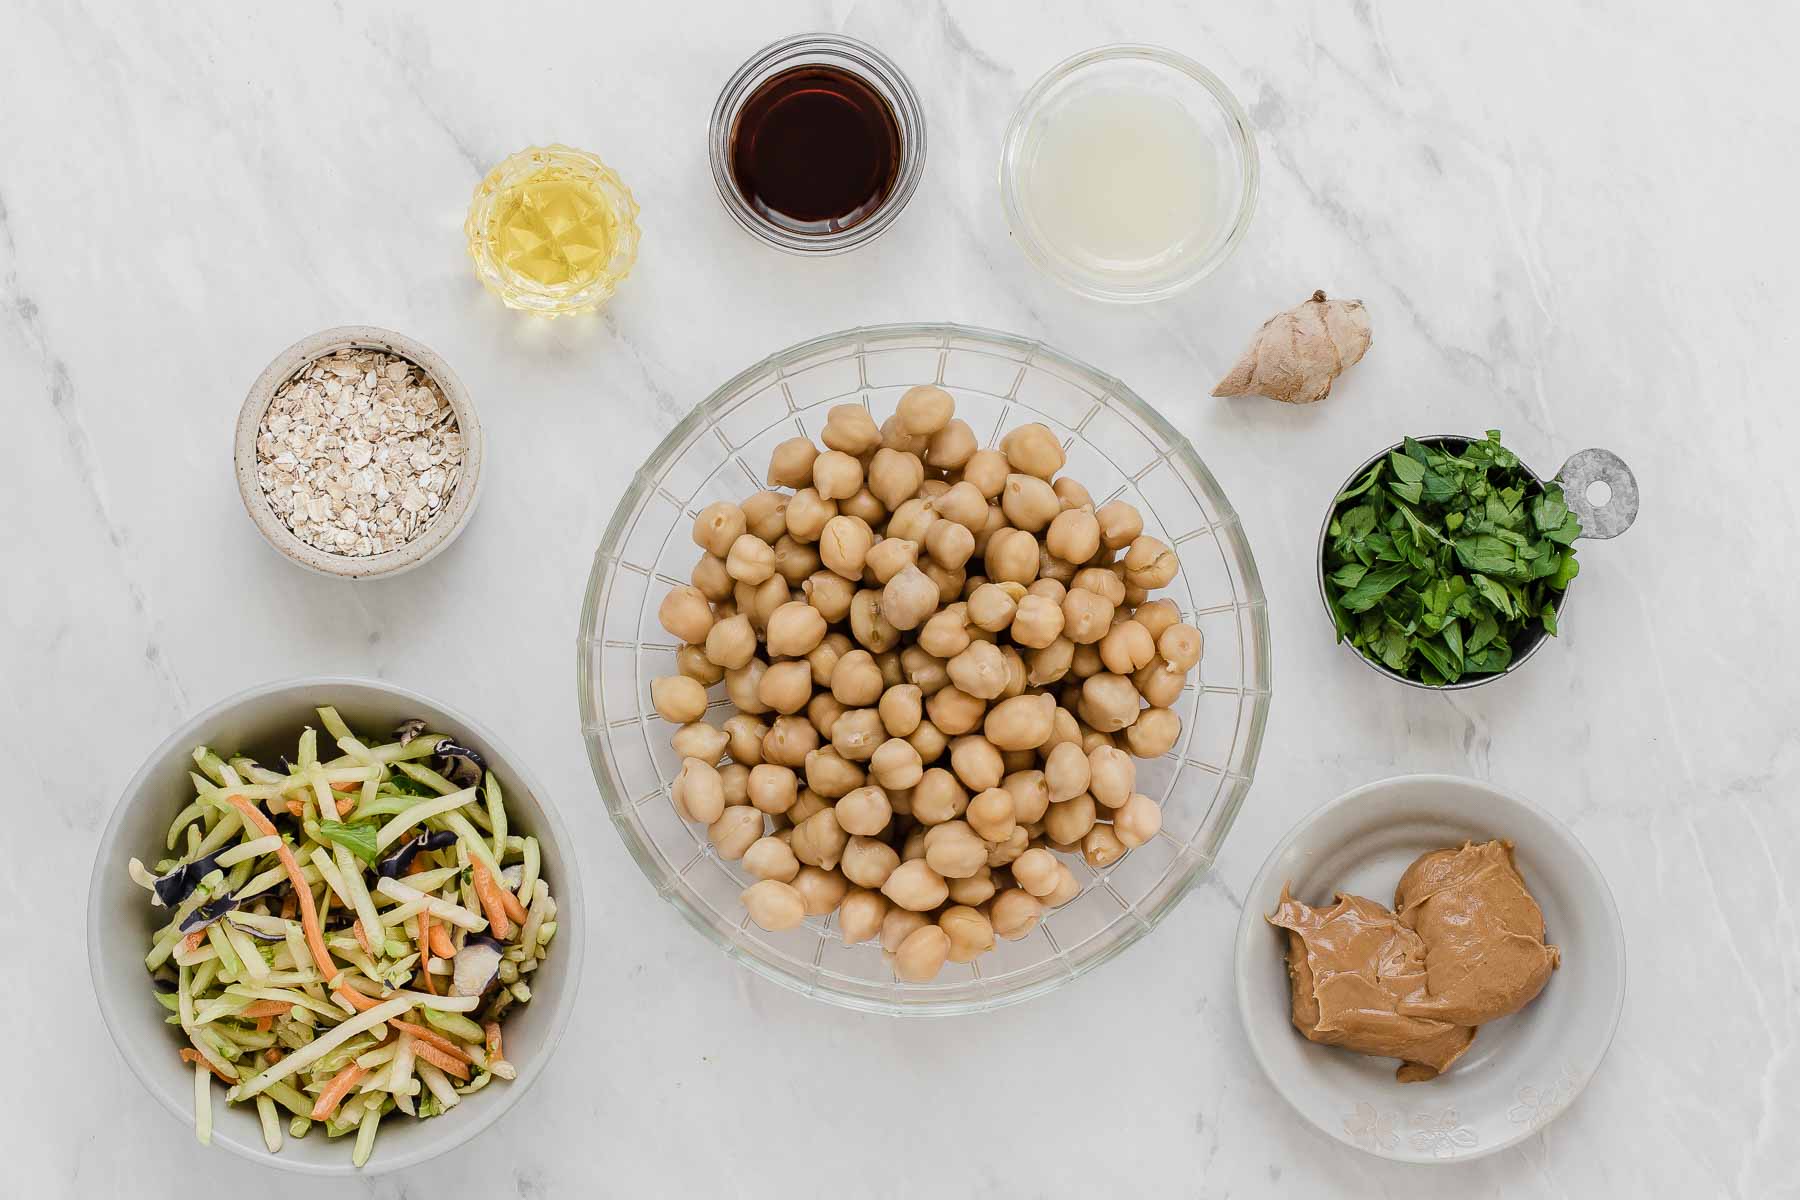 Chickpeas, broccoli slaw, peanut butter, and cilantro in small bowls on grey counter.